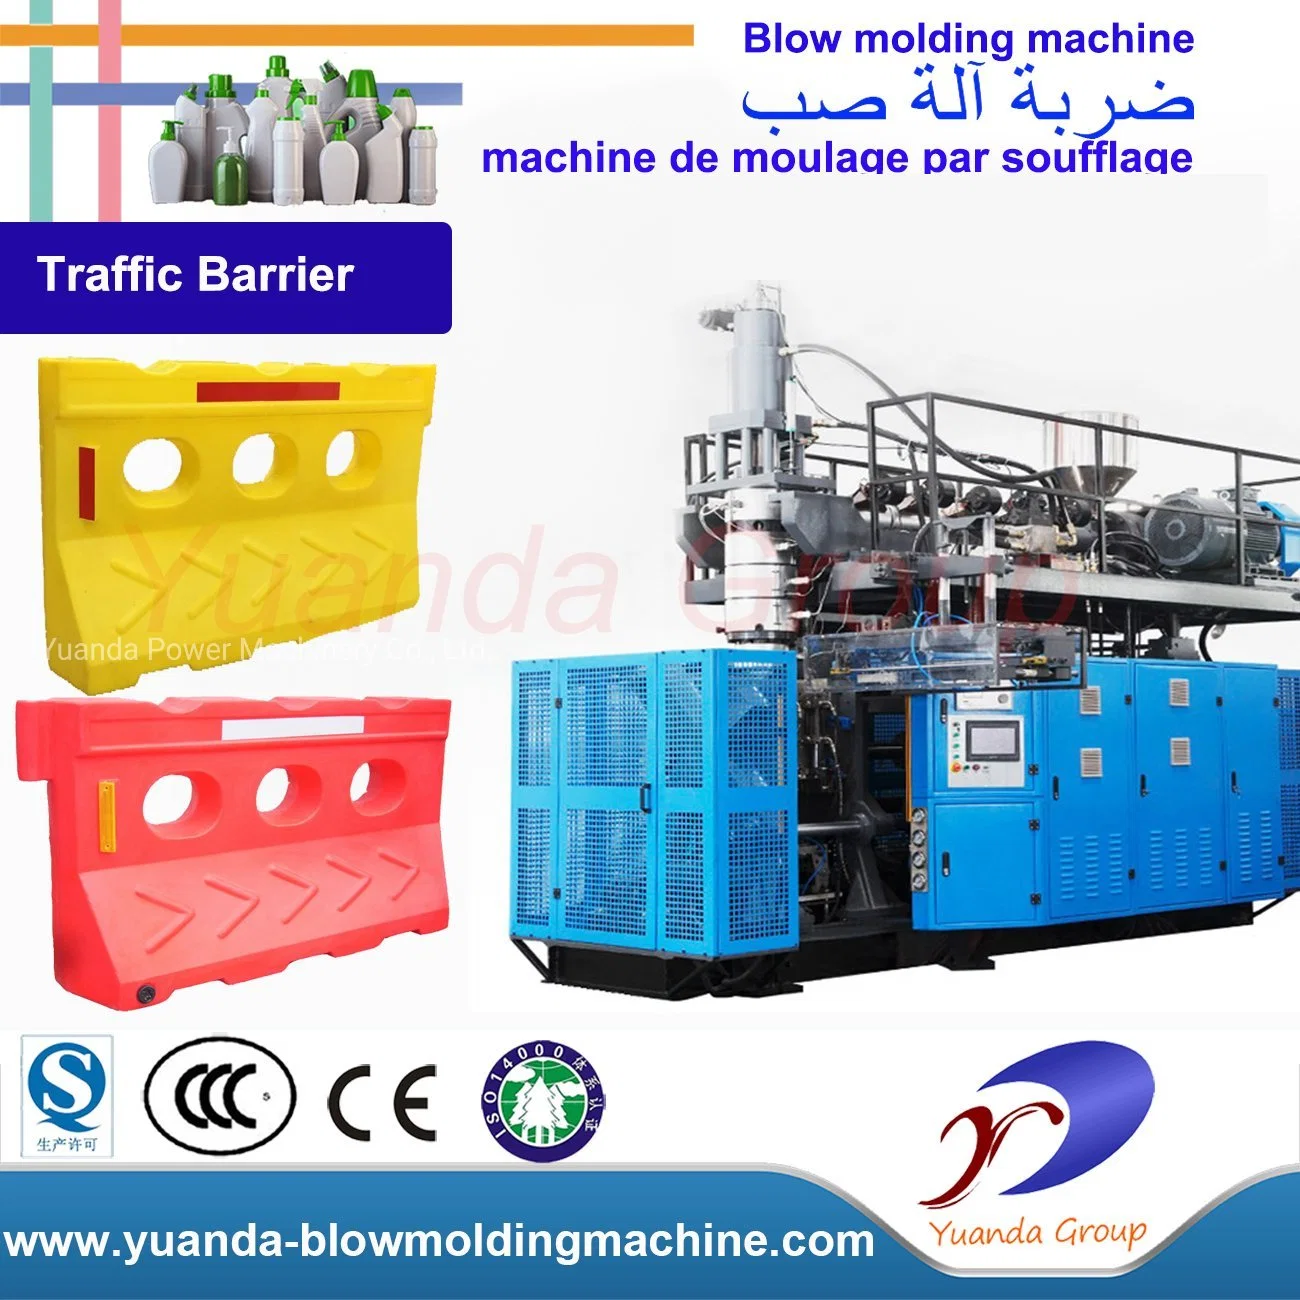 Big-Size Plastic Safety Barricade/Traffic Barrier/Water Filled Barrier Blow Moulding Machine / Blow Molding Machine